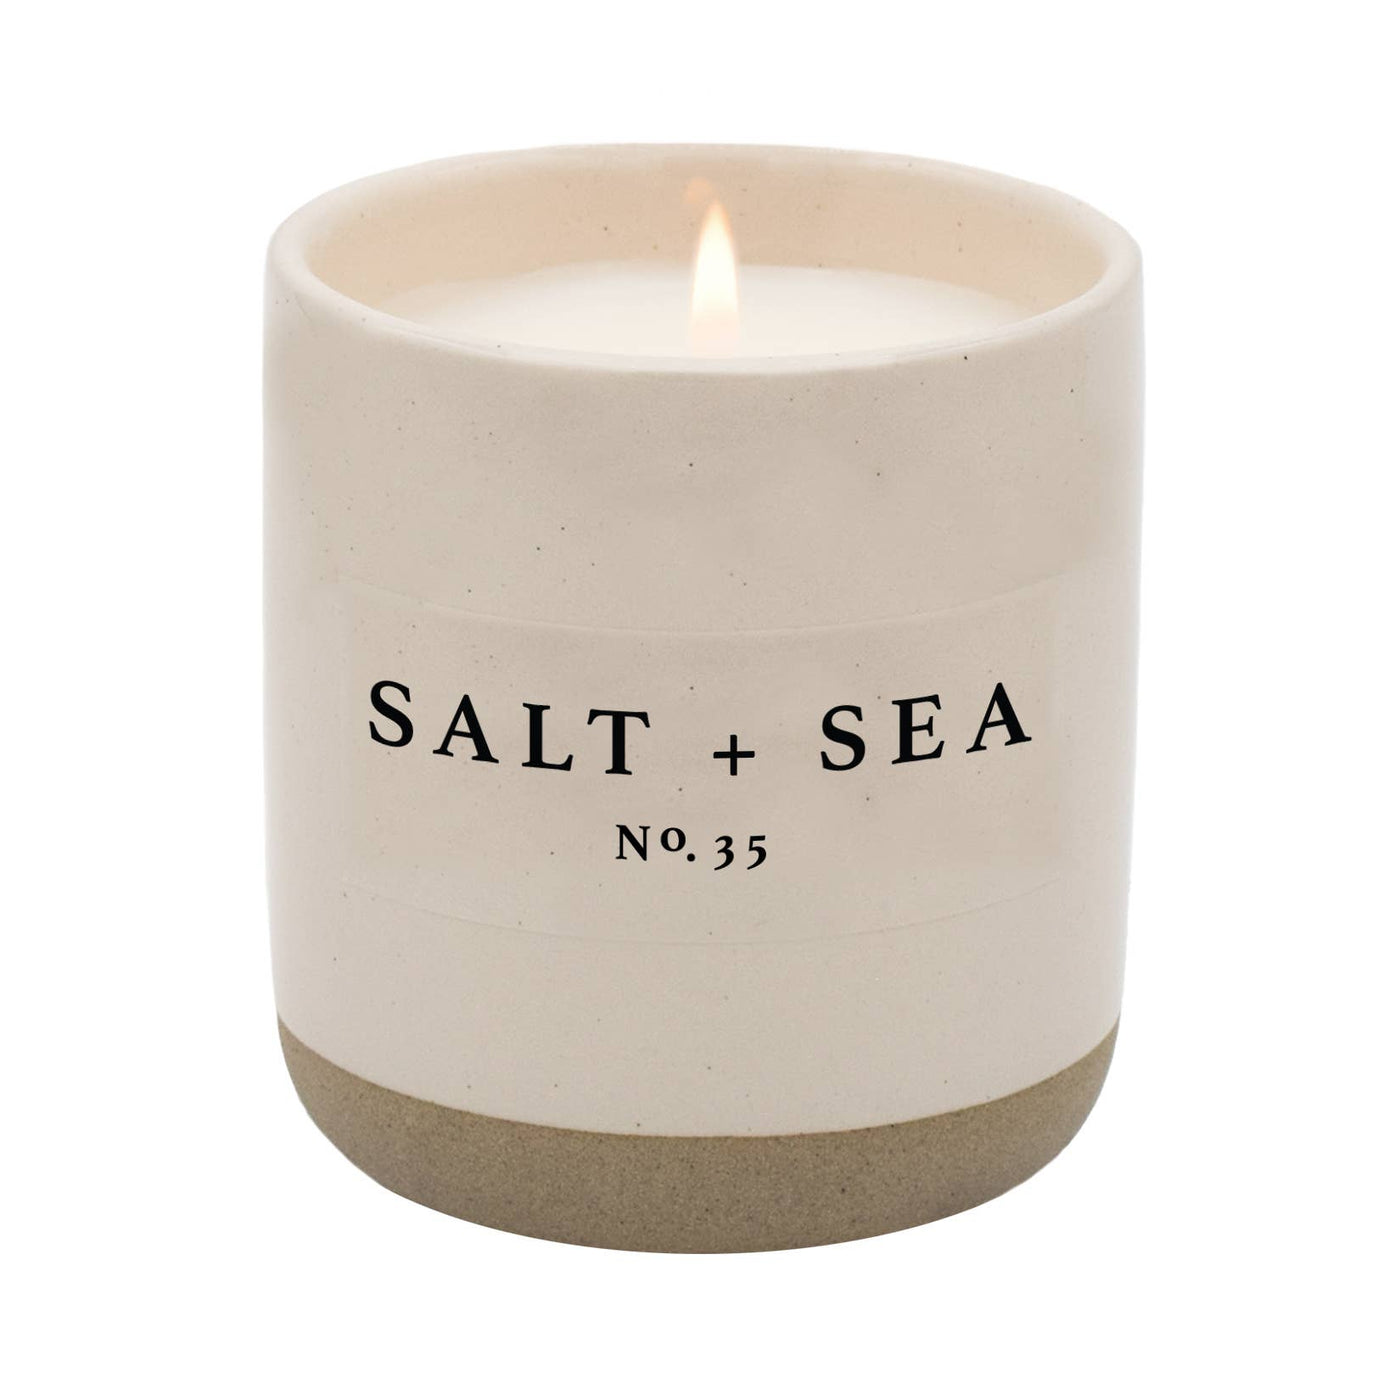 Salt & Sea Stoneware Soy Candle - Non-toxic, handmade with natural materials.  Available at Avalon Willow Home.